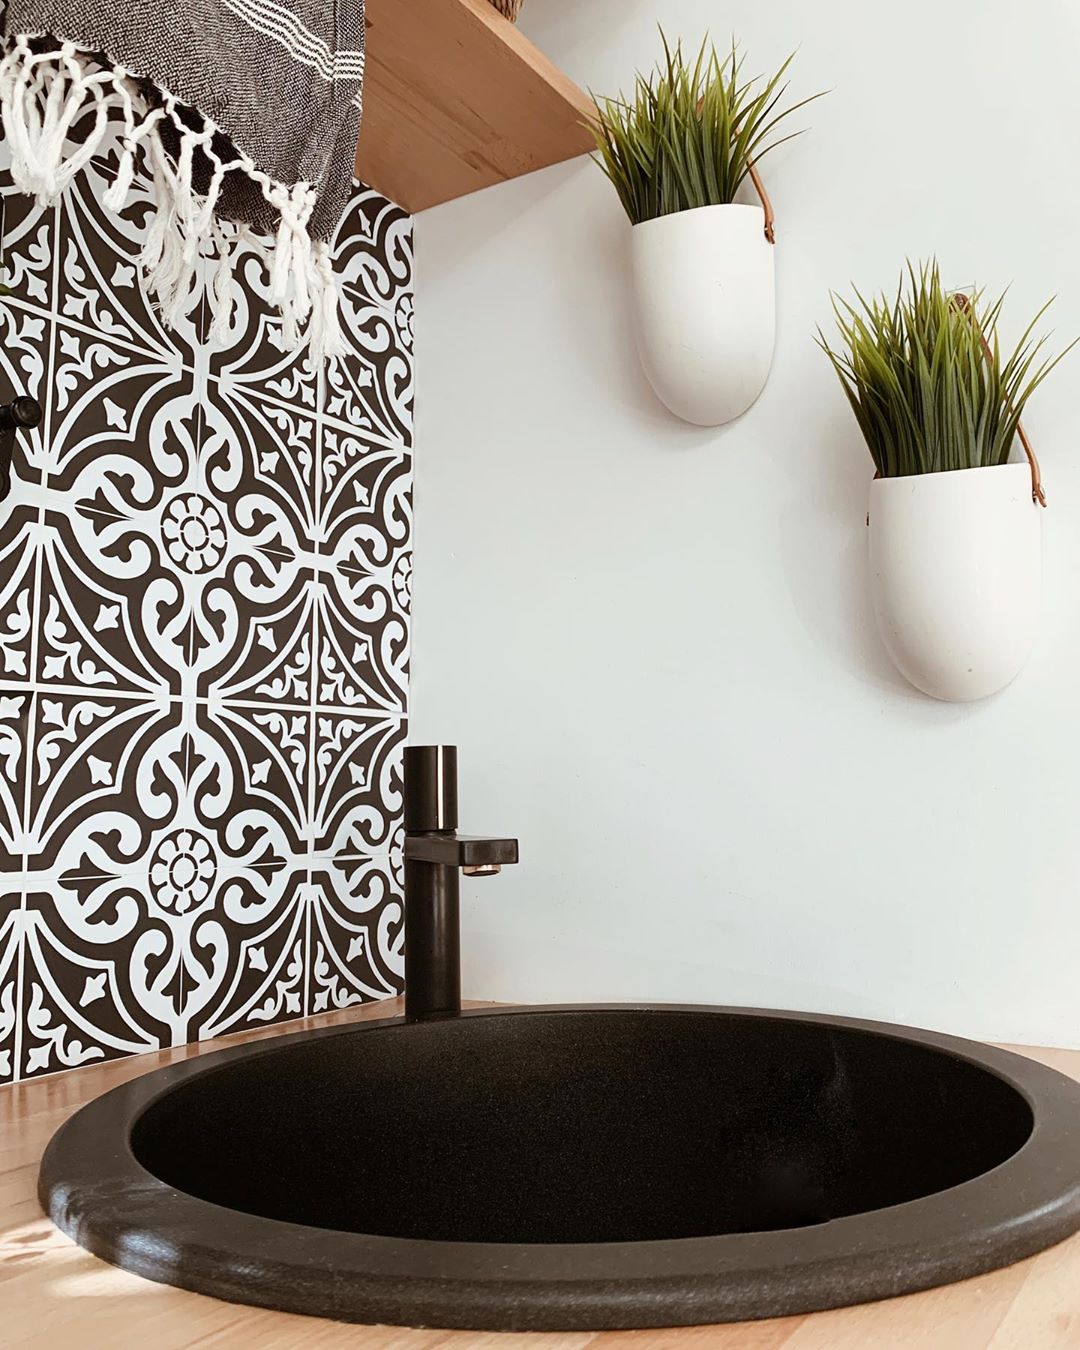 Black and white splashback behind a black RV sink and tap